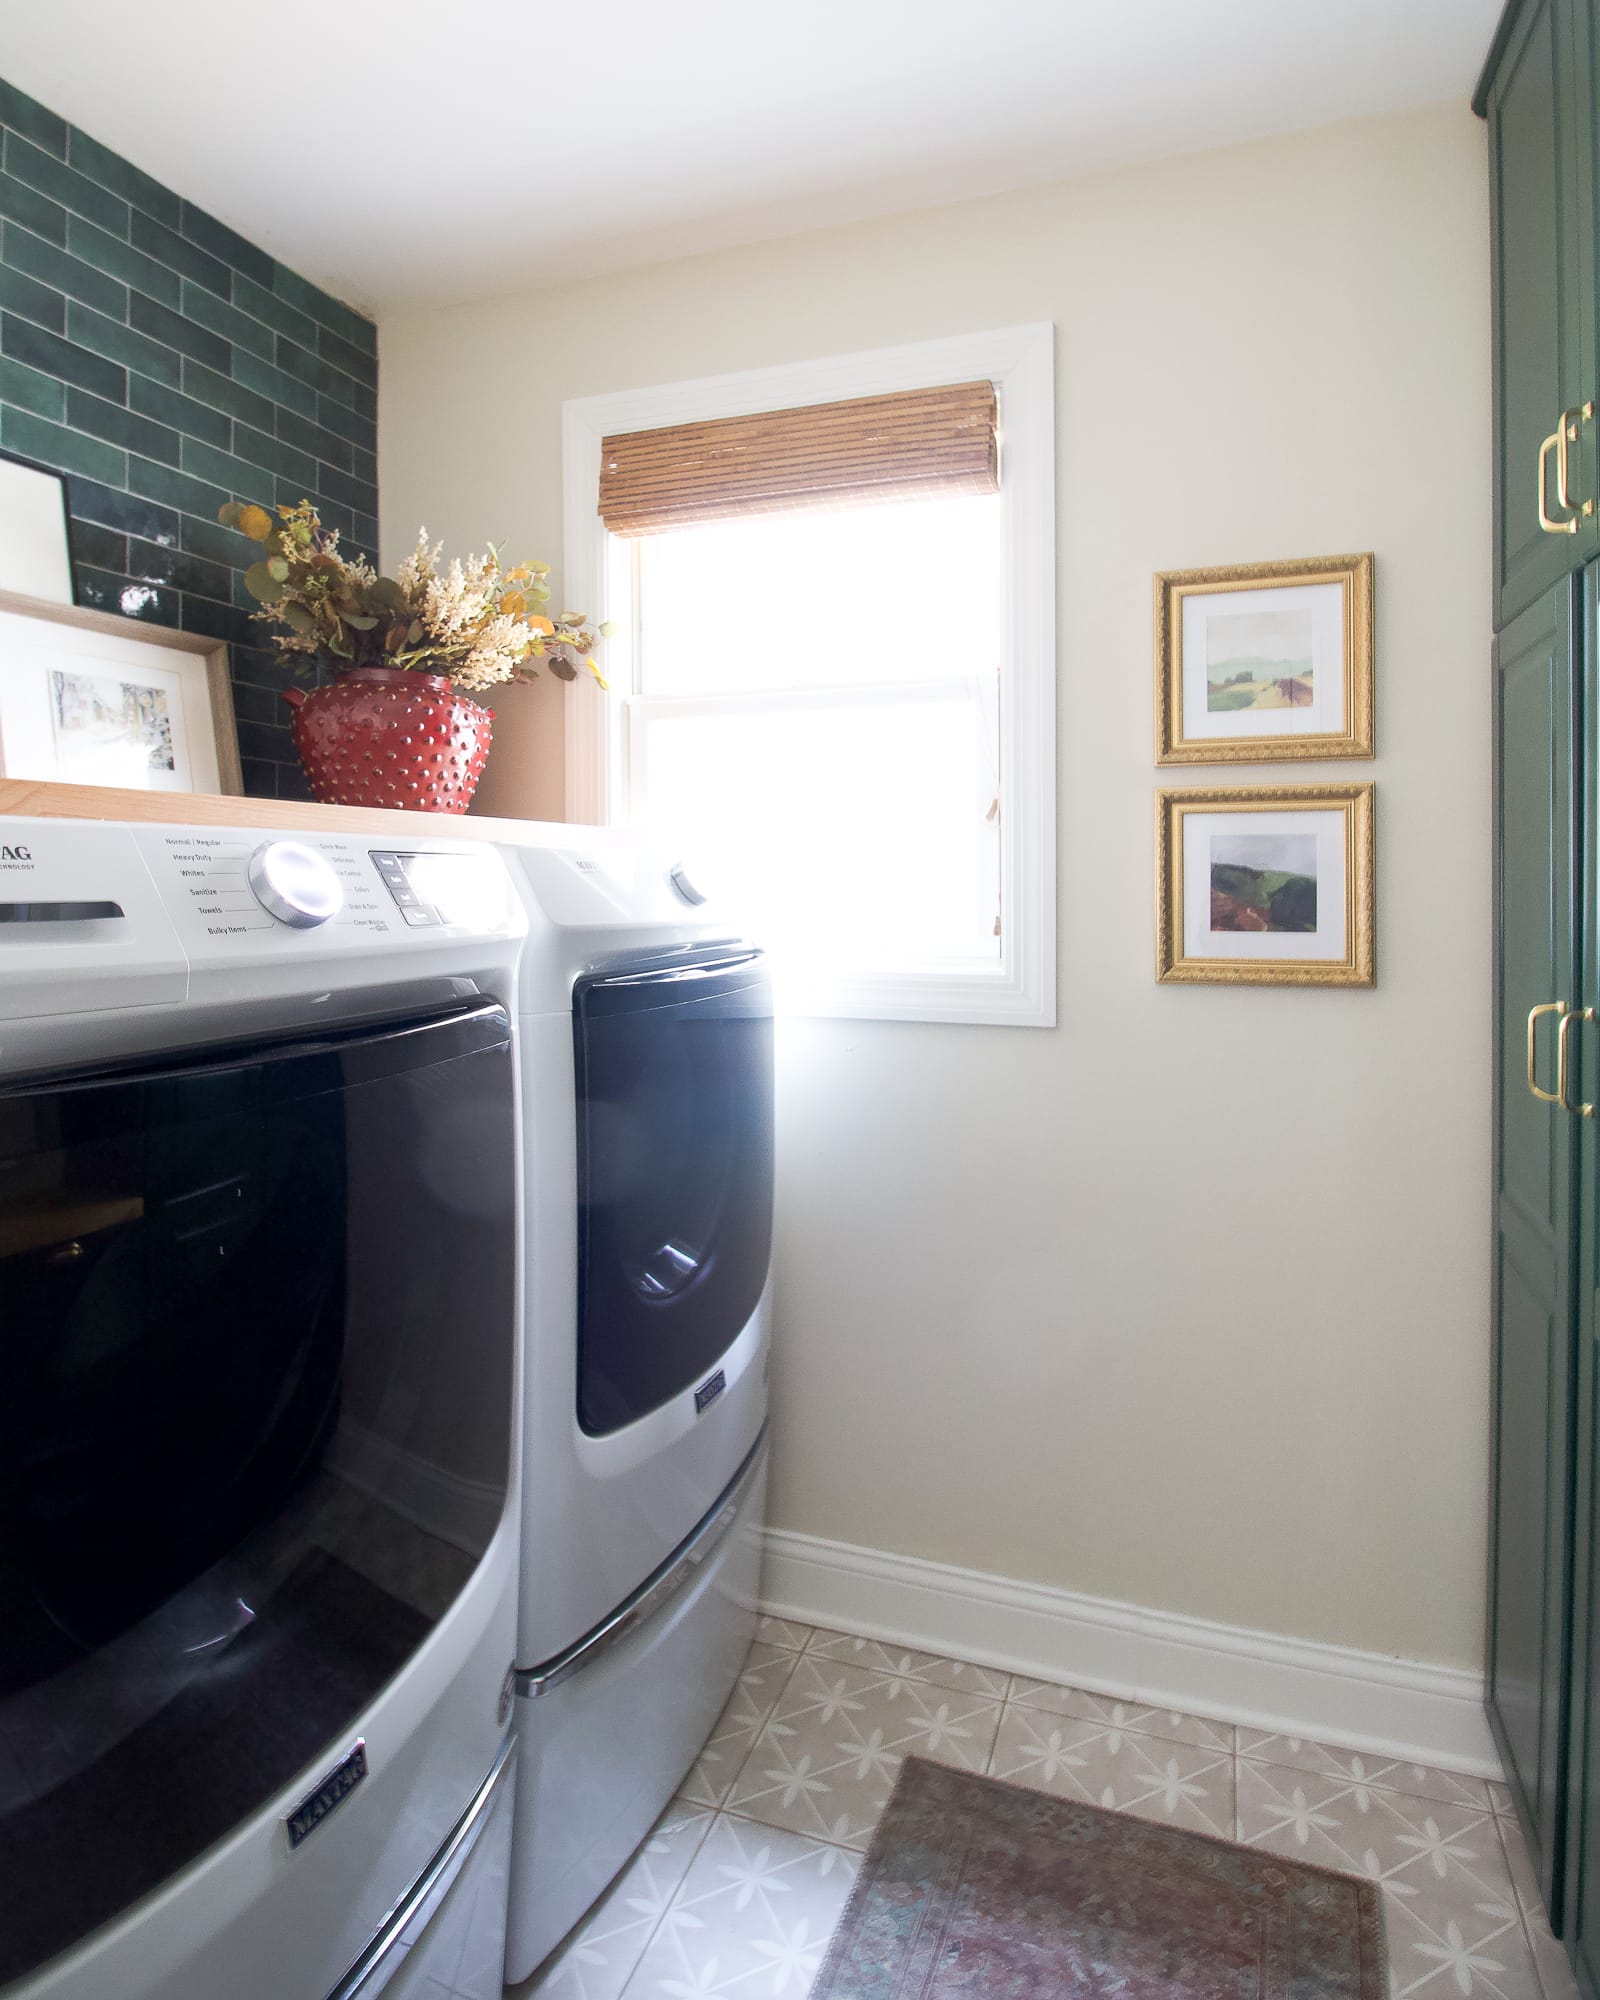 Laundry room before and after